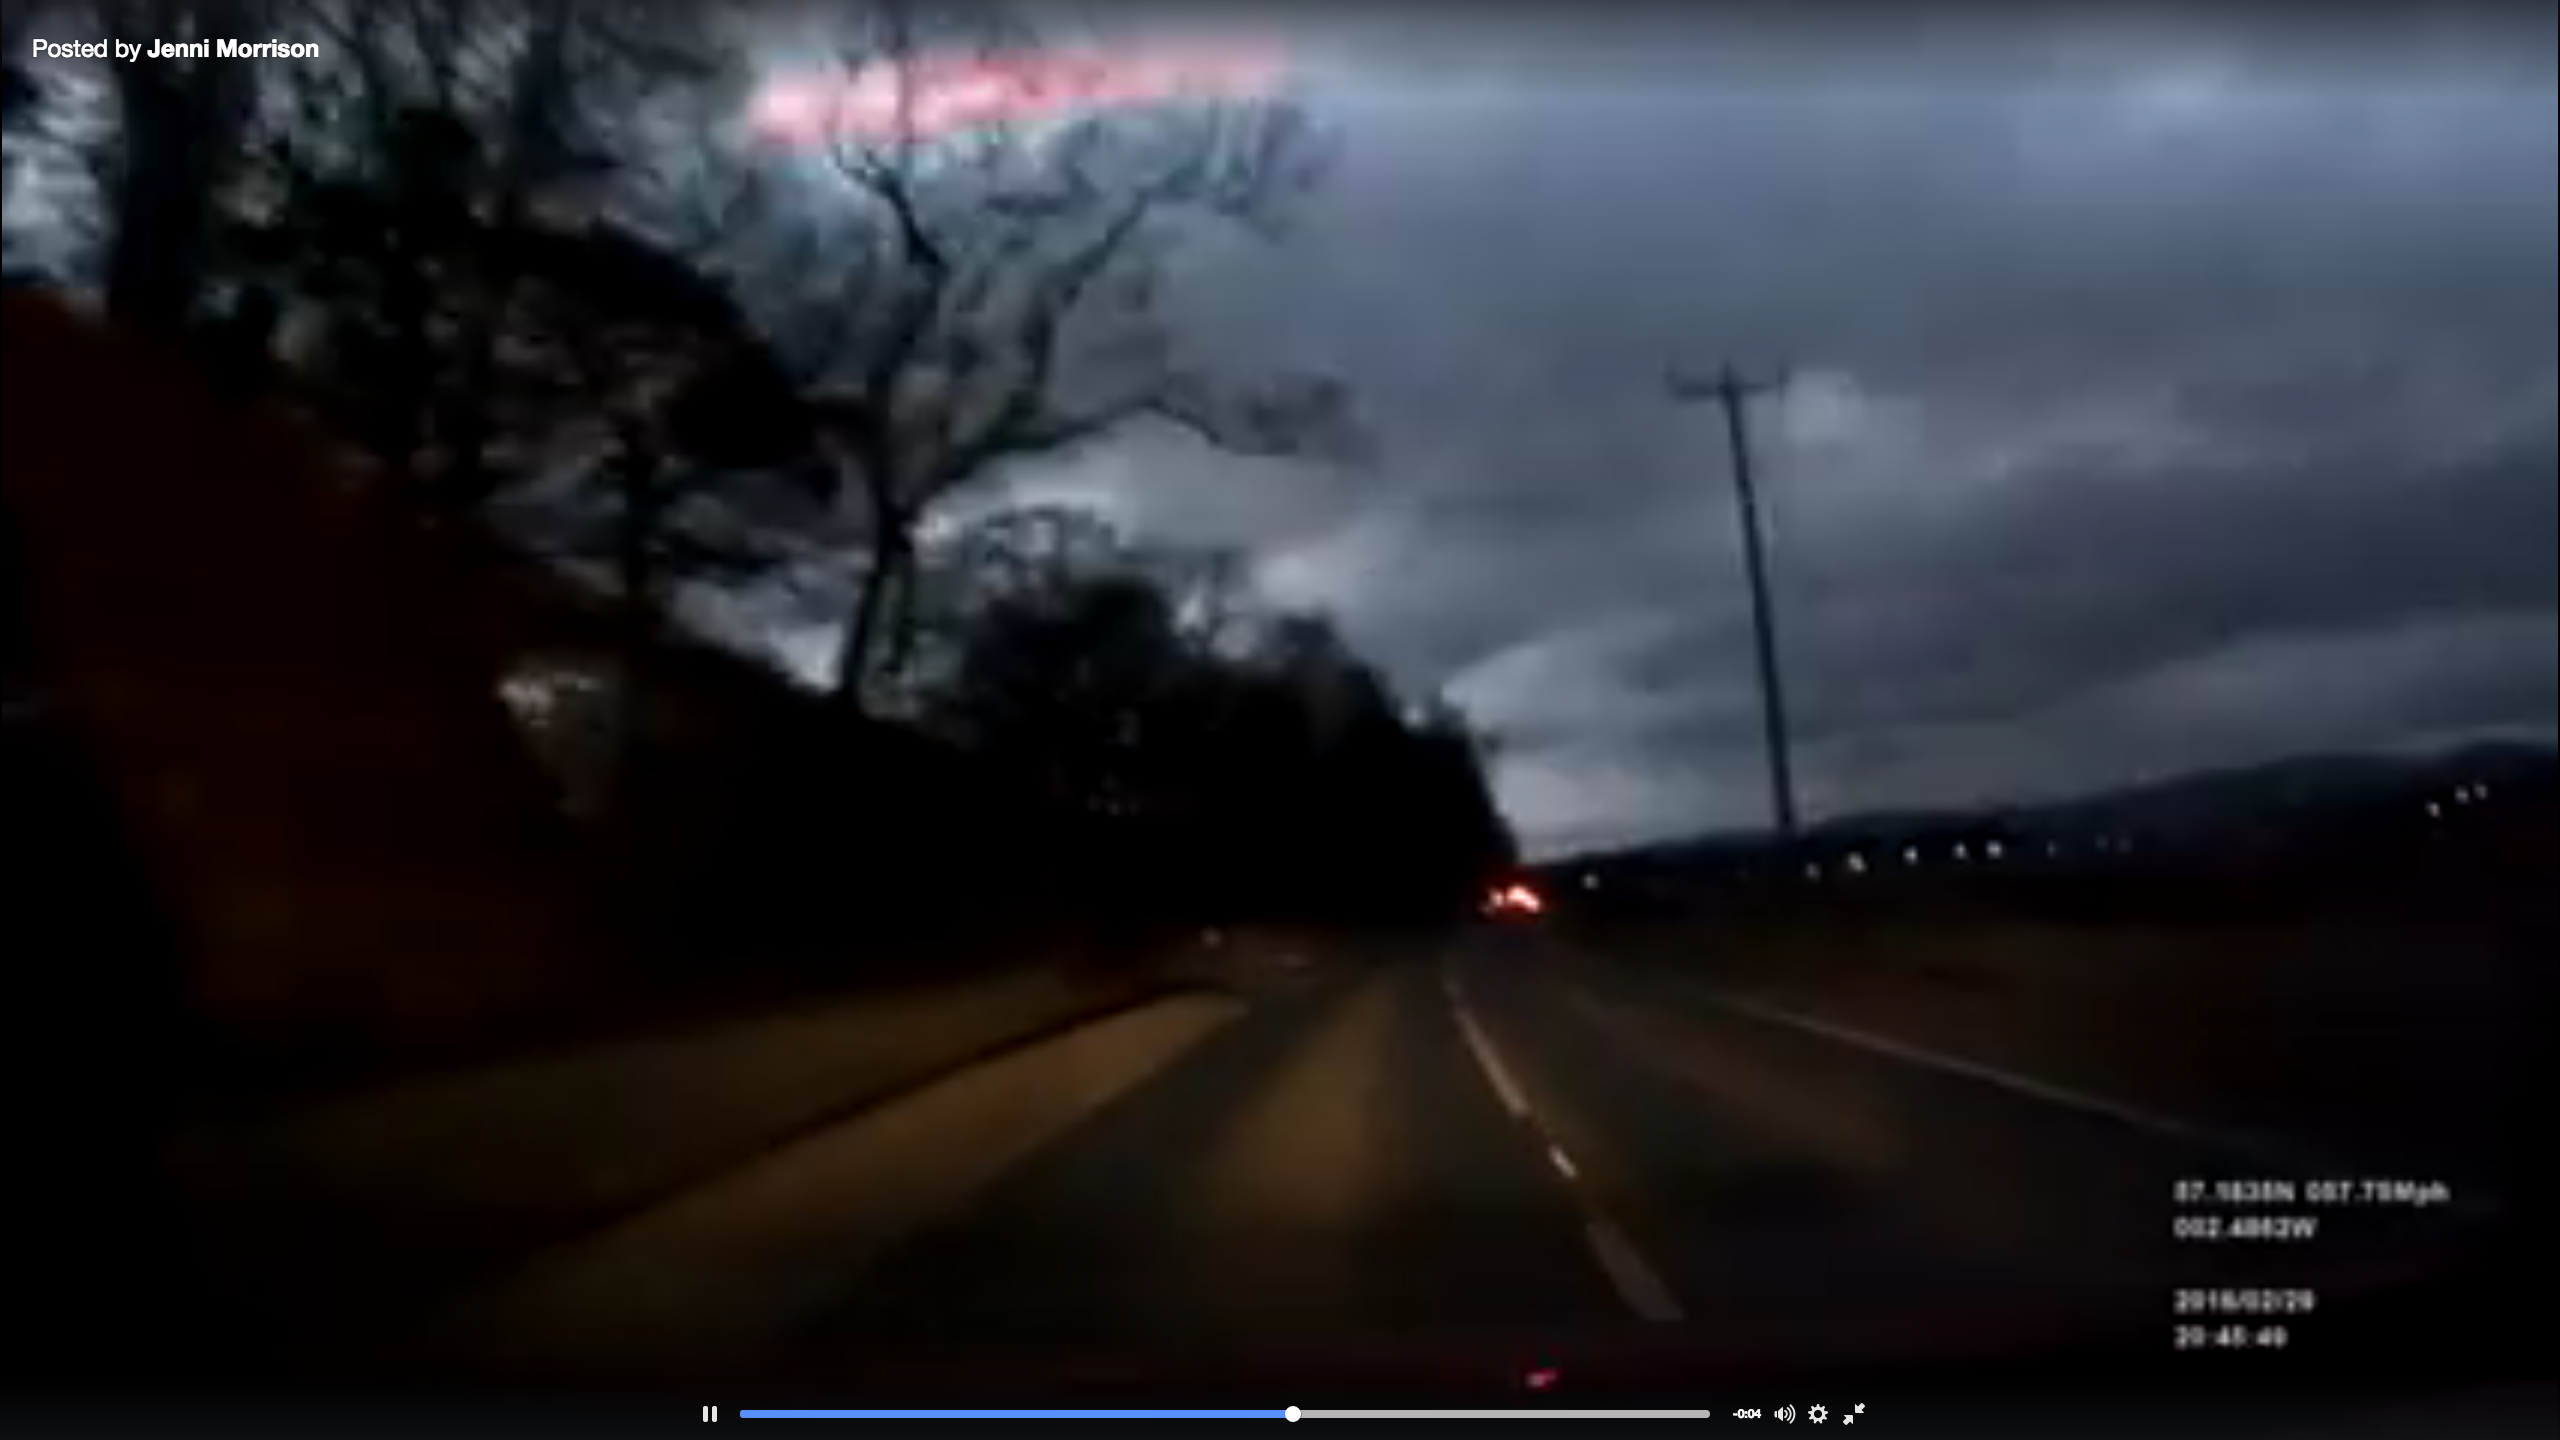 Picture of moment white light illuminated Scottish skies. From video by Jenni Morrison posted to Facebook